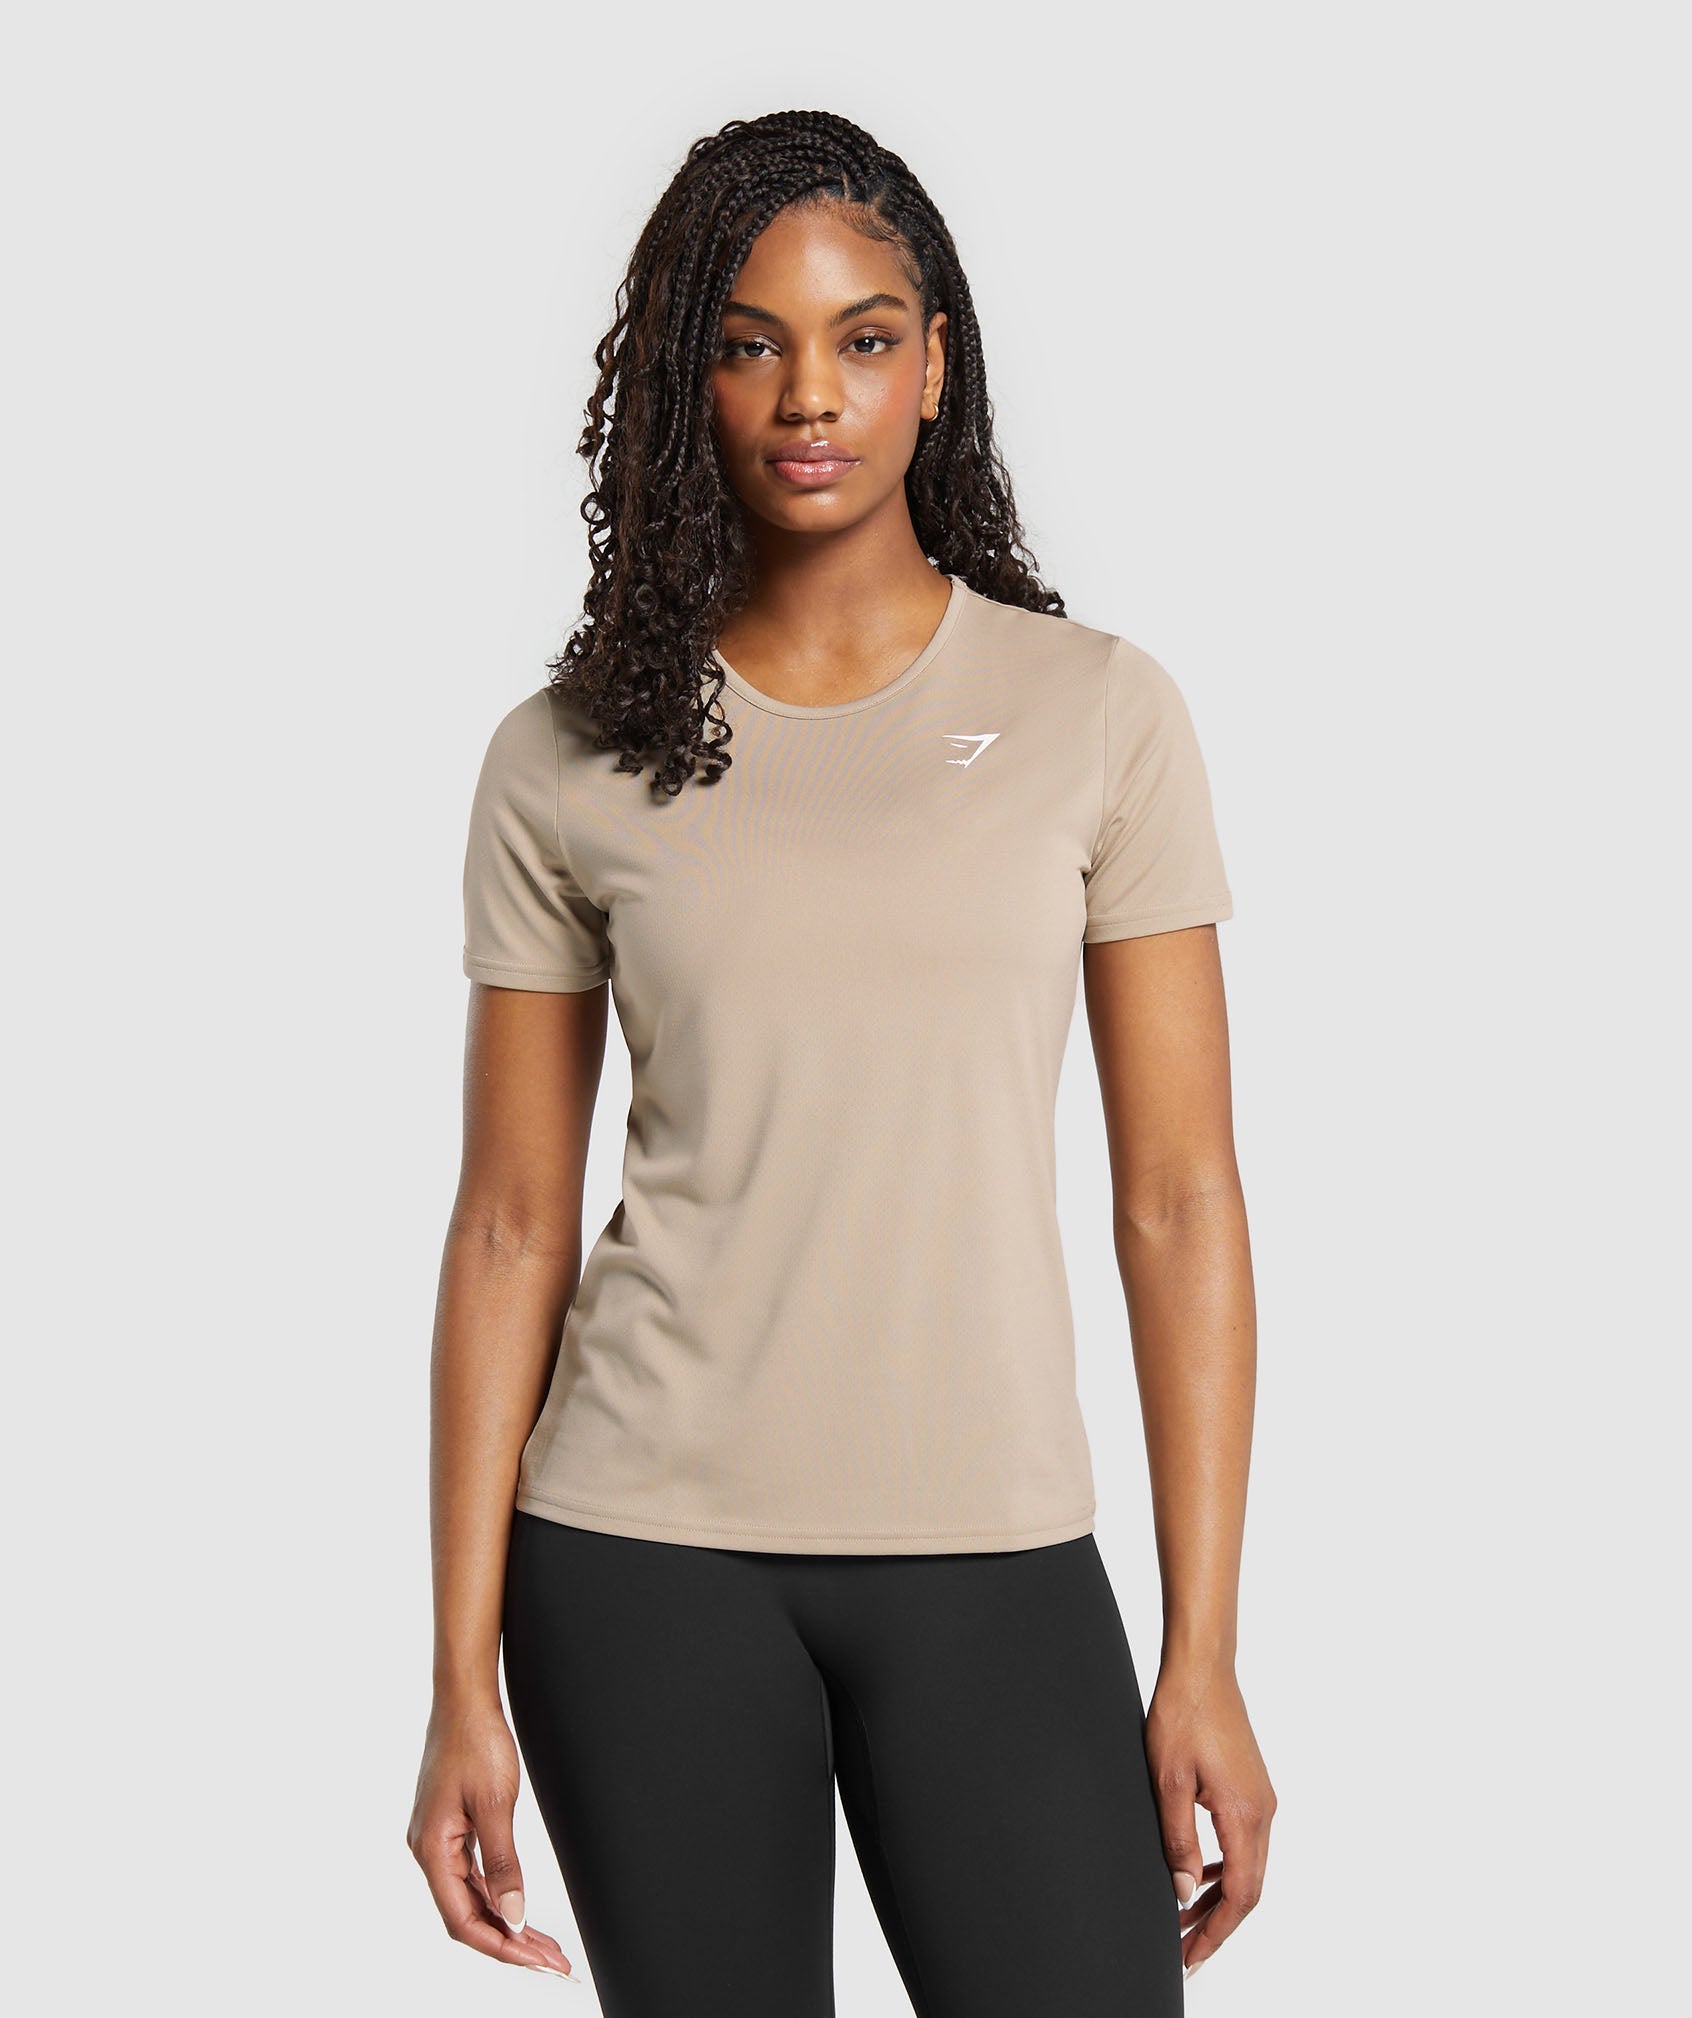 Training T-Shirt in Sand Brown